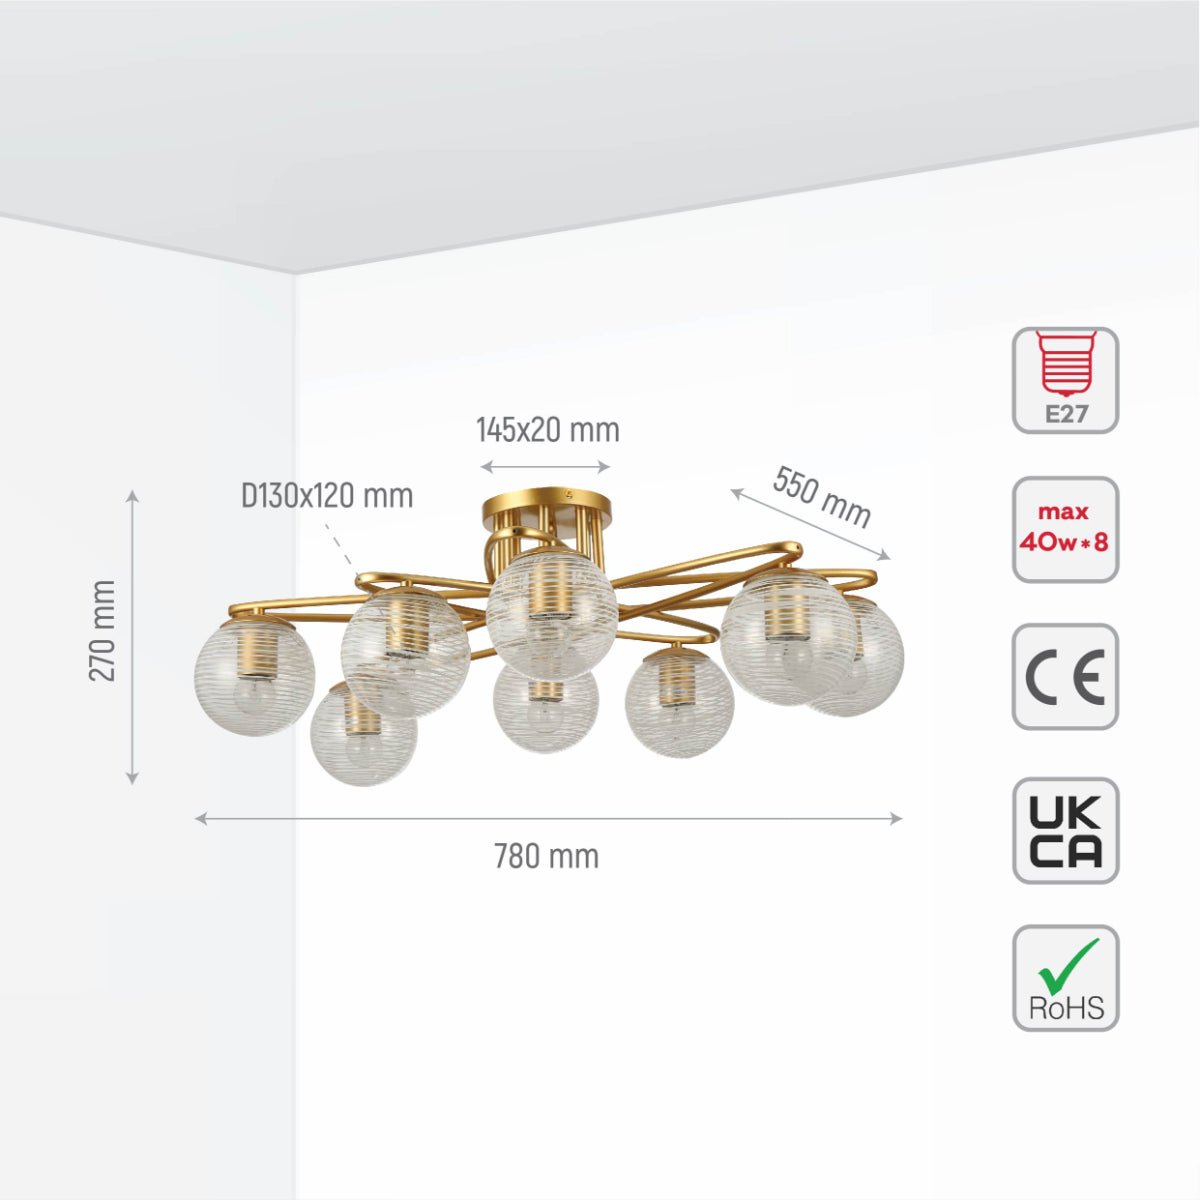 Size and specs of Gold Ellipse Metal Textured Globe Glass Modern Ceiling Light with E27 Fittings | TEKLED 159-17676